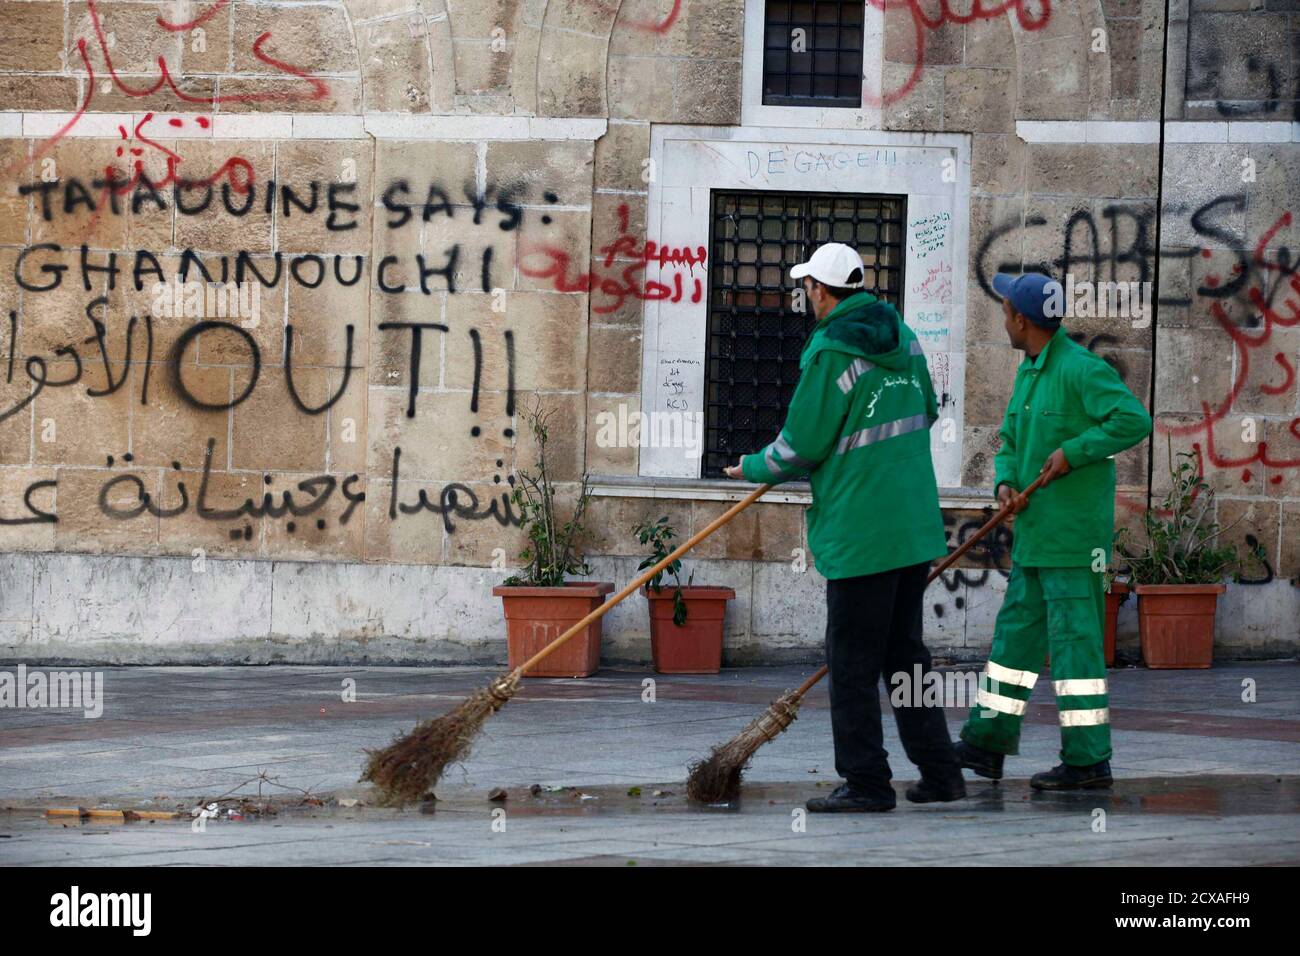 Sanitary service workers clean a street in the Kasbah district after  Tunisian inhabitants of Sidi Bouzid along with protesters were evacuated  following clashes with security forces in front of the government palace